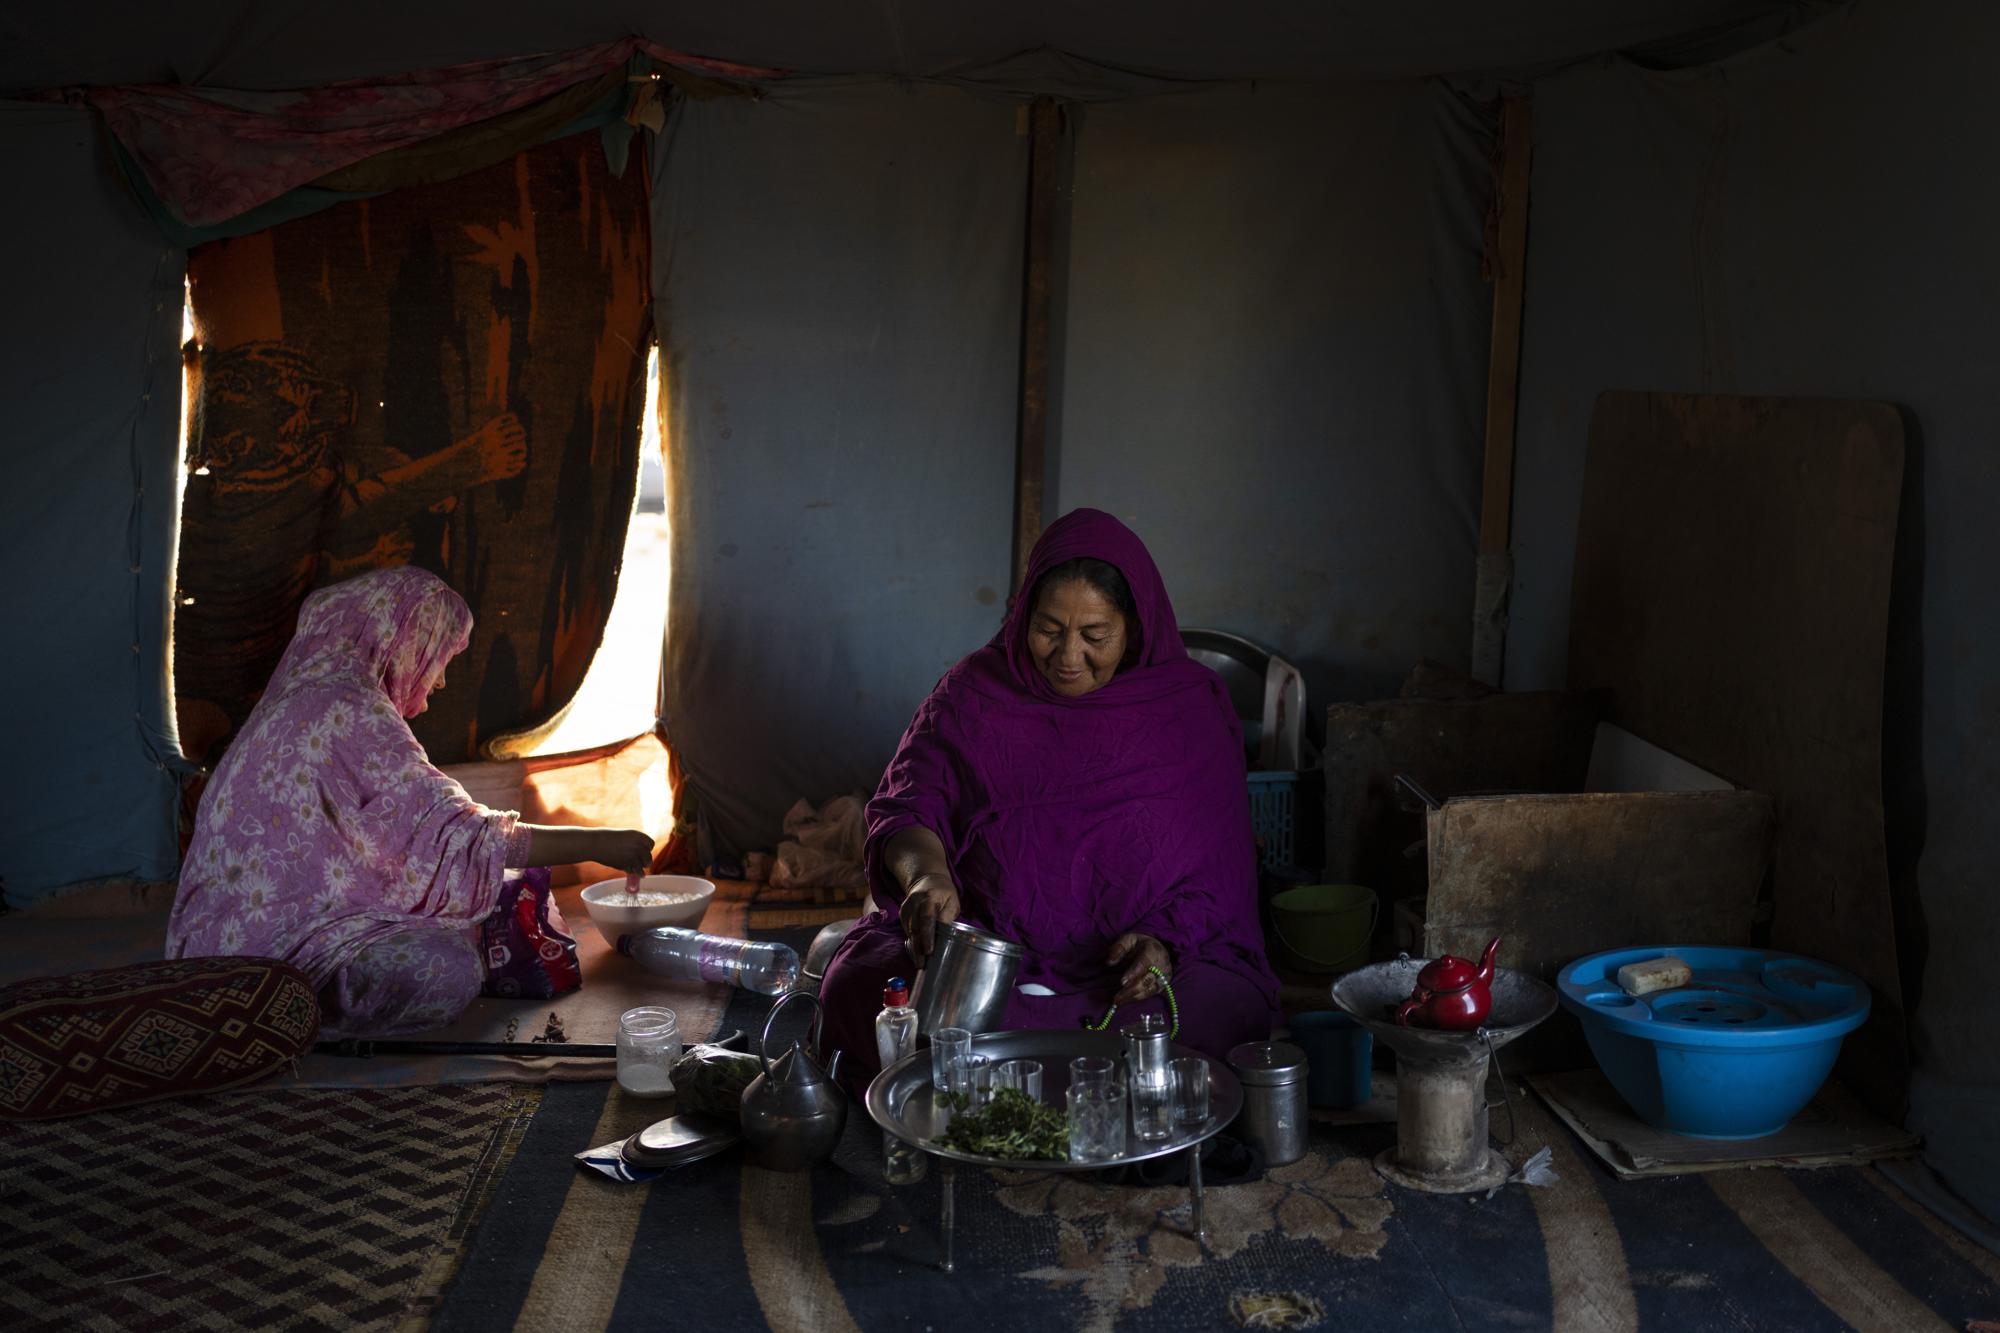 A Sahrawi family prepares breakfast inside their tent in the outskirts of Boujdour refugee camp, Algeria, Saturday, Oct. 16, 2021. (AP Photo/Bernat Armangue)